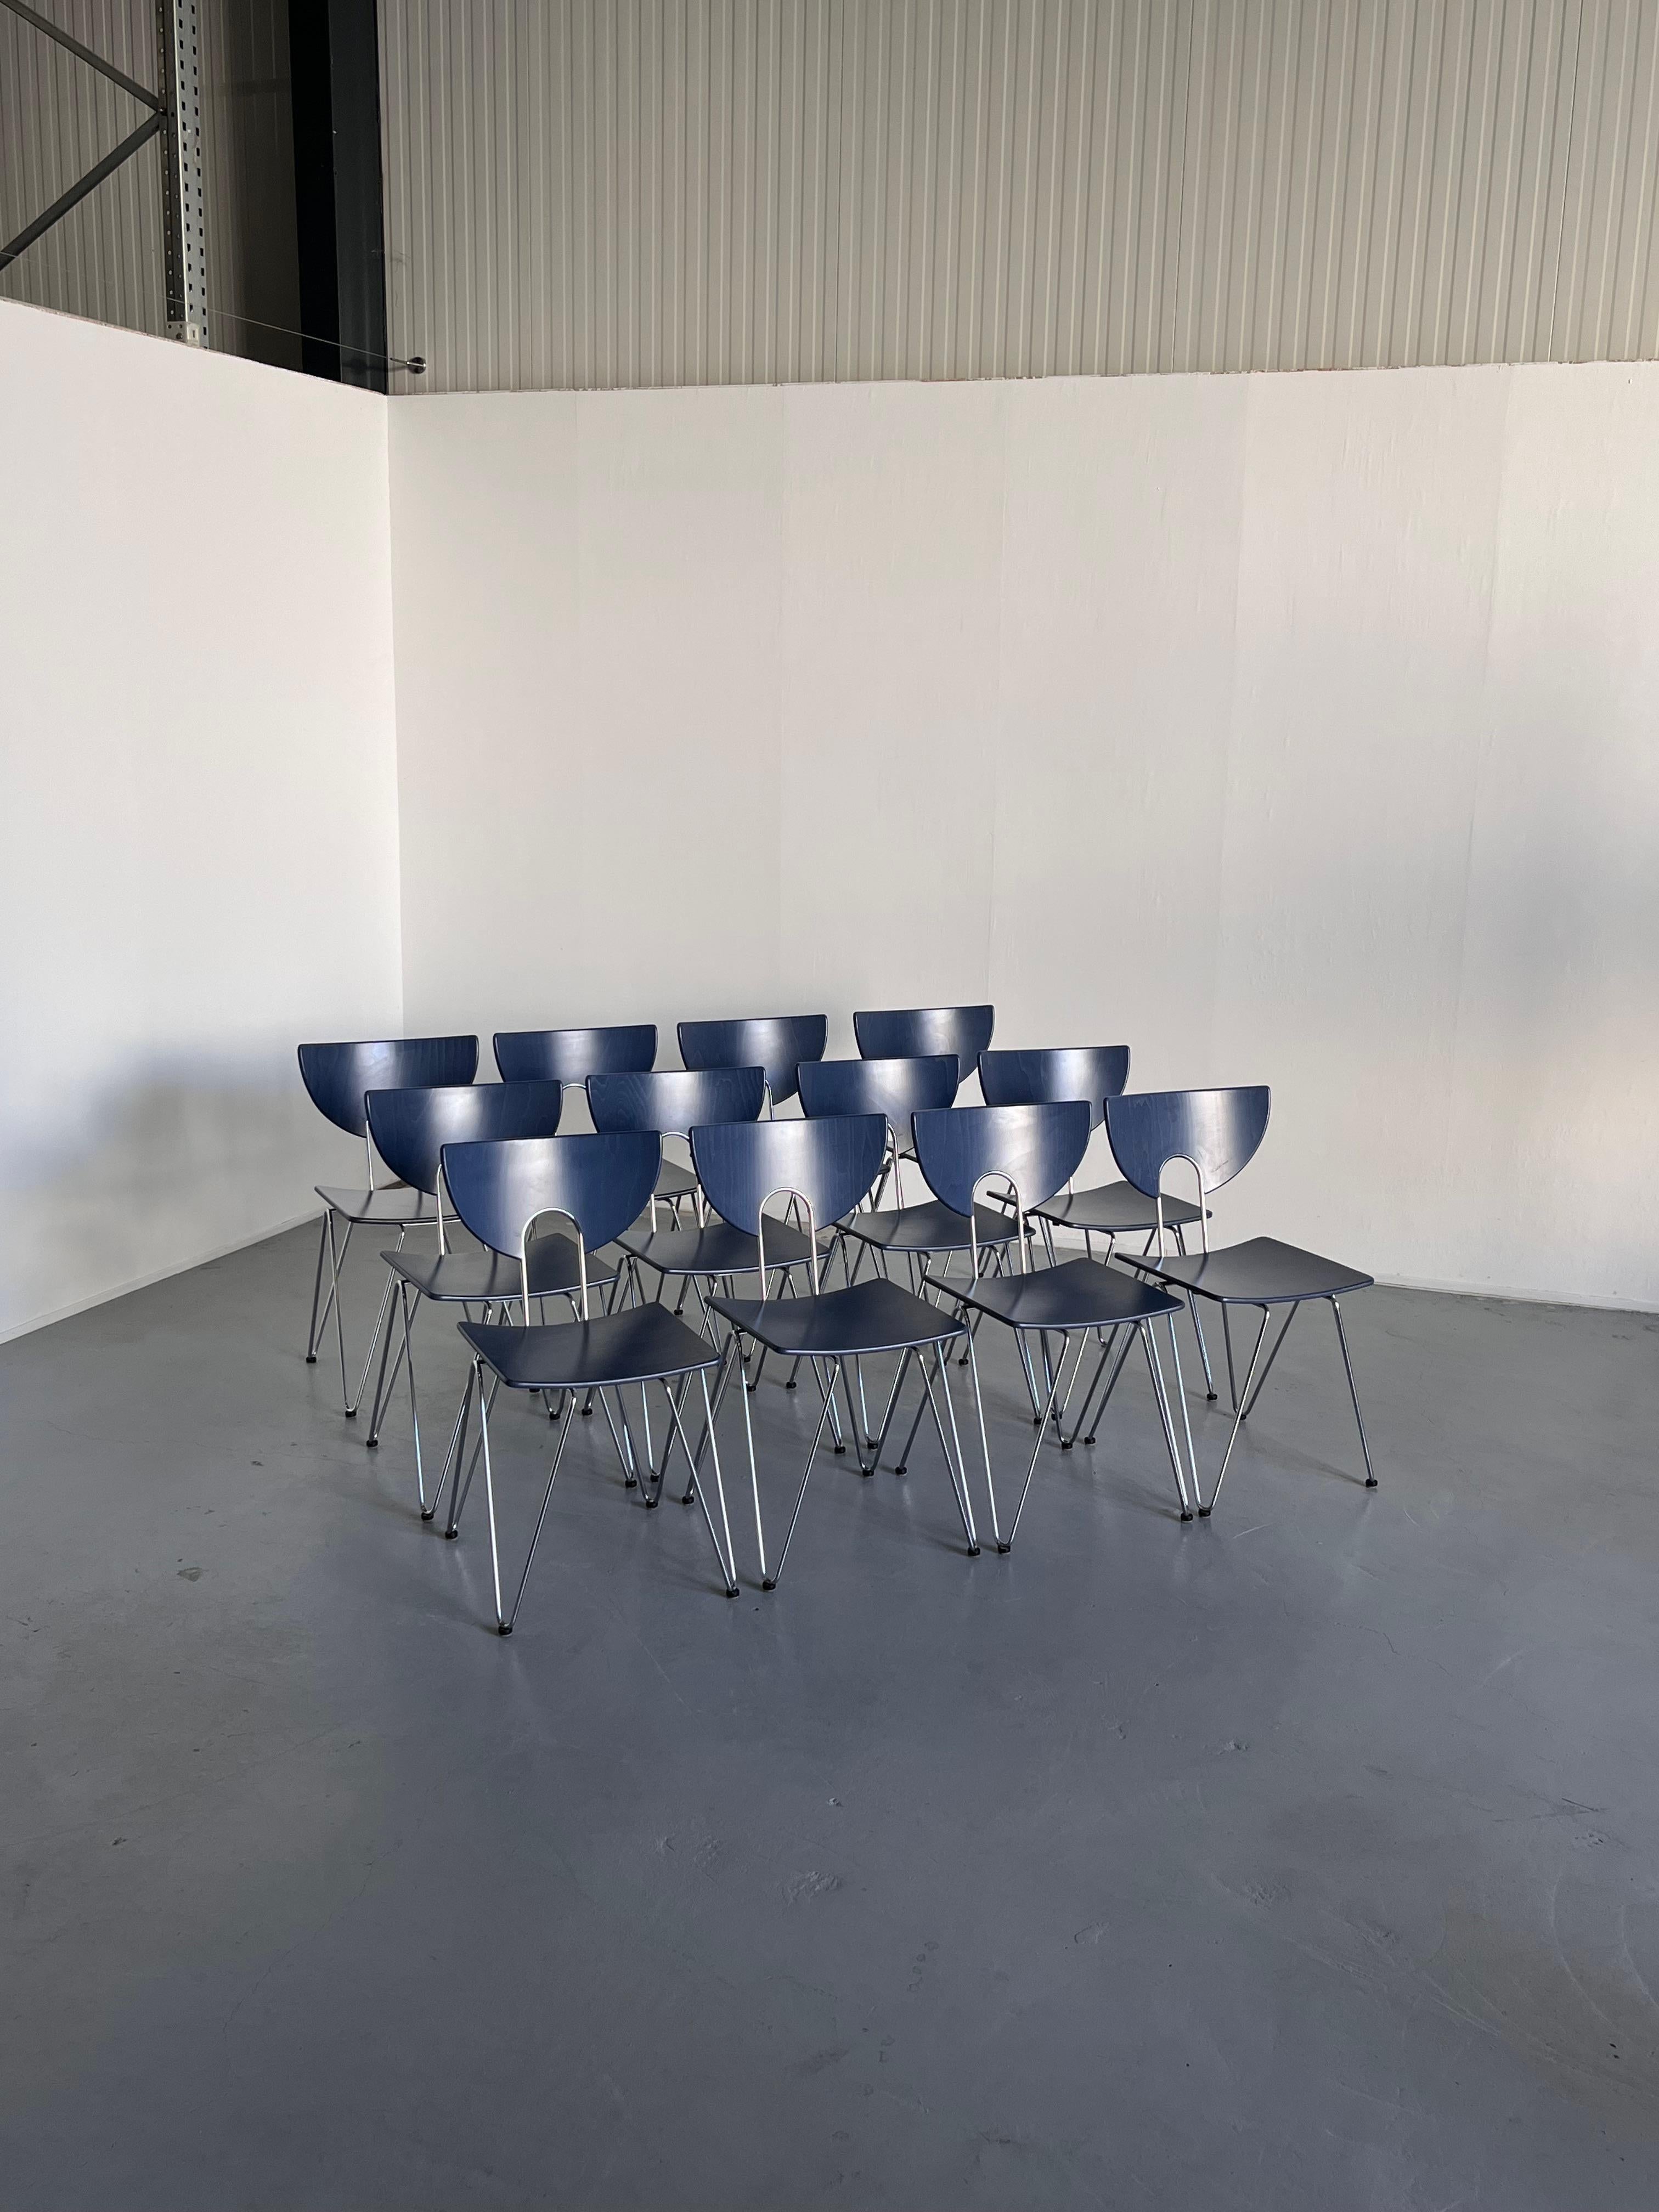 Set of twelve vintage Kusch+Co stackable postmodern dining chairs in a blue-grey lacquered finish.
Chromed metal structure and wooden seat and backrest.

Designed in the 1980s, early 1990s production.
High-quality.

In very good vintage condition